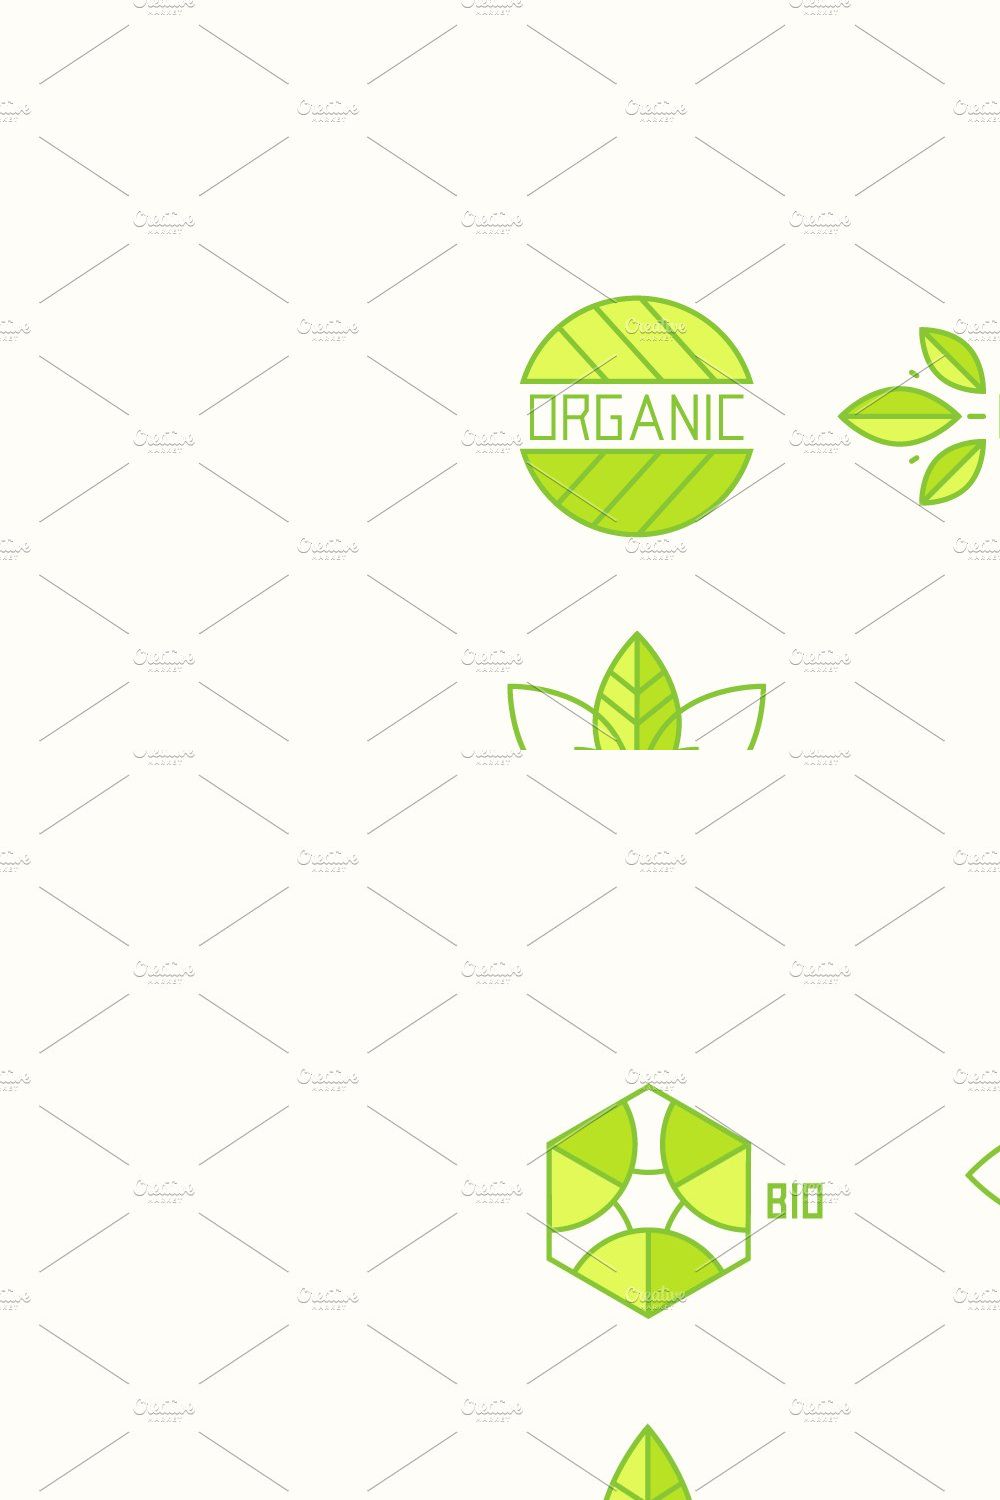 Collection of organic logos pinterest preview image.